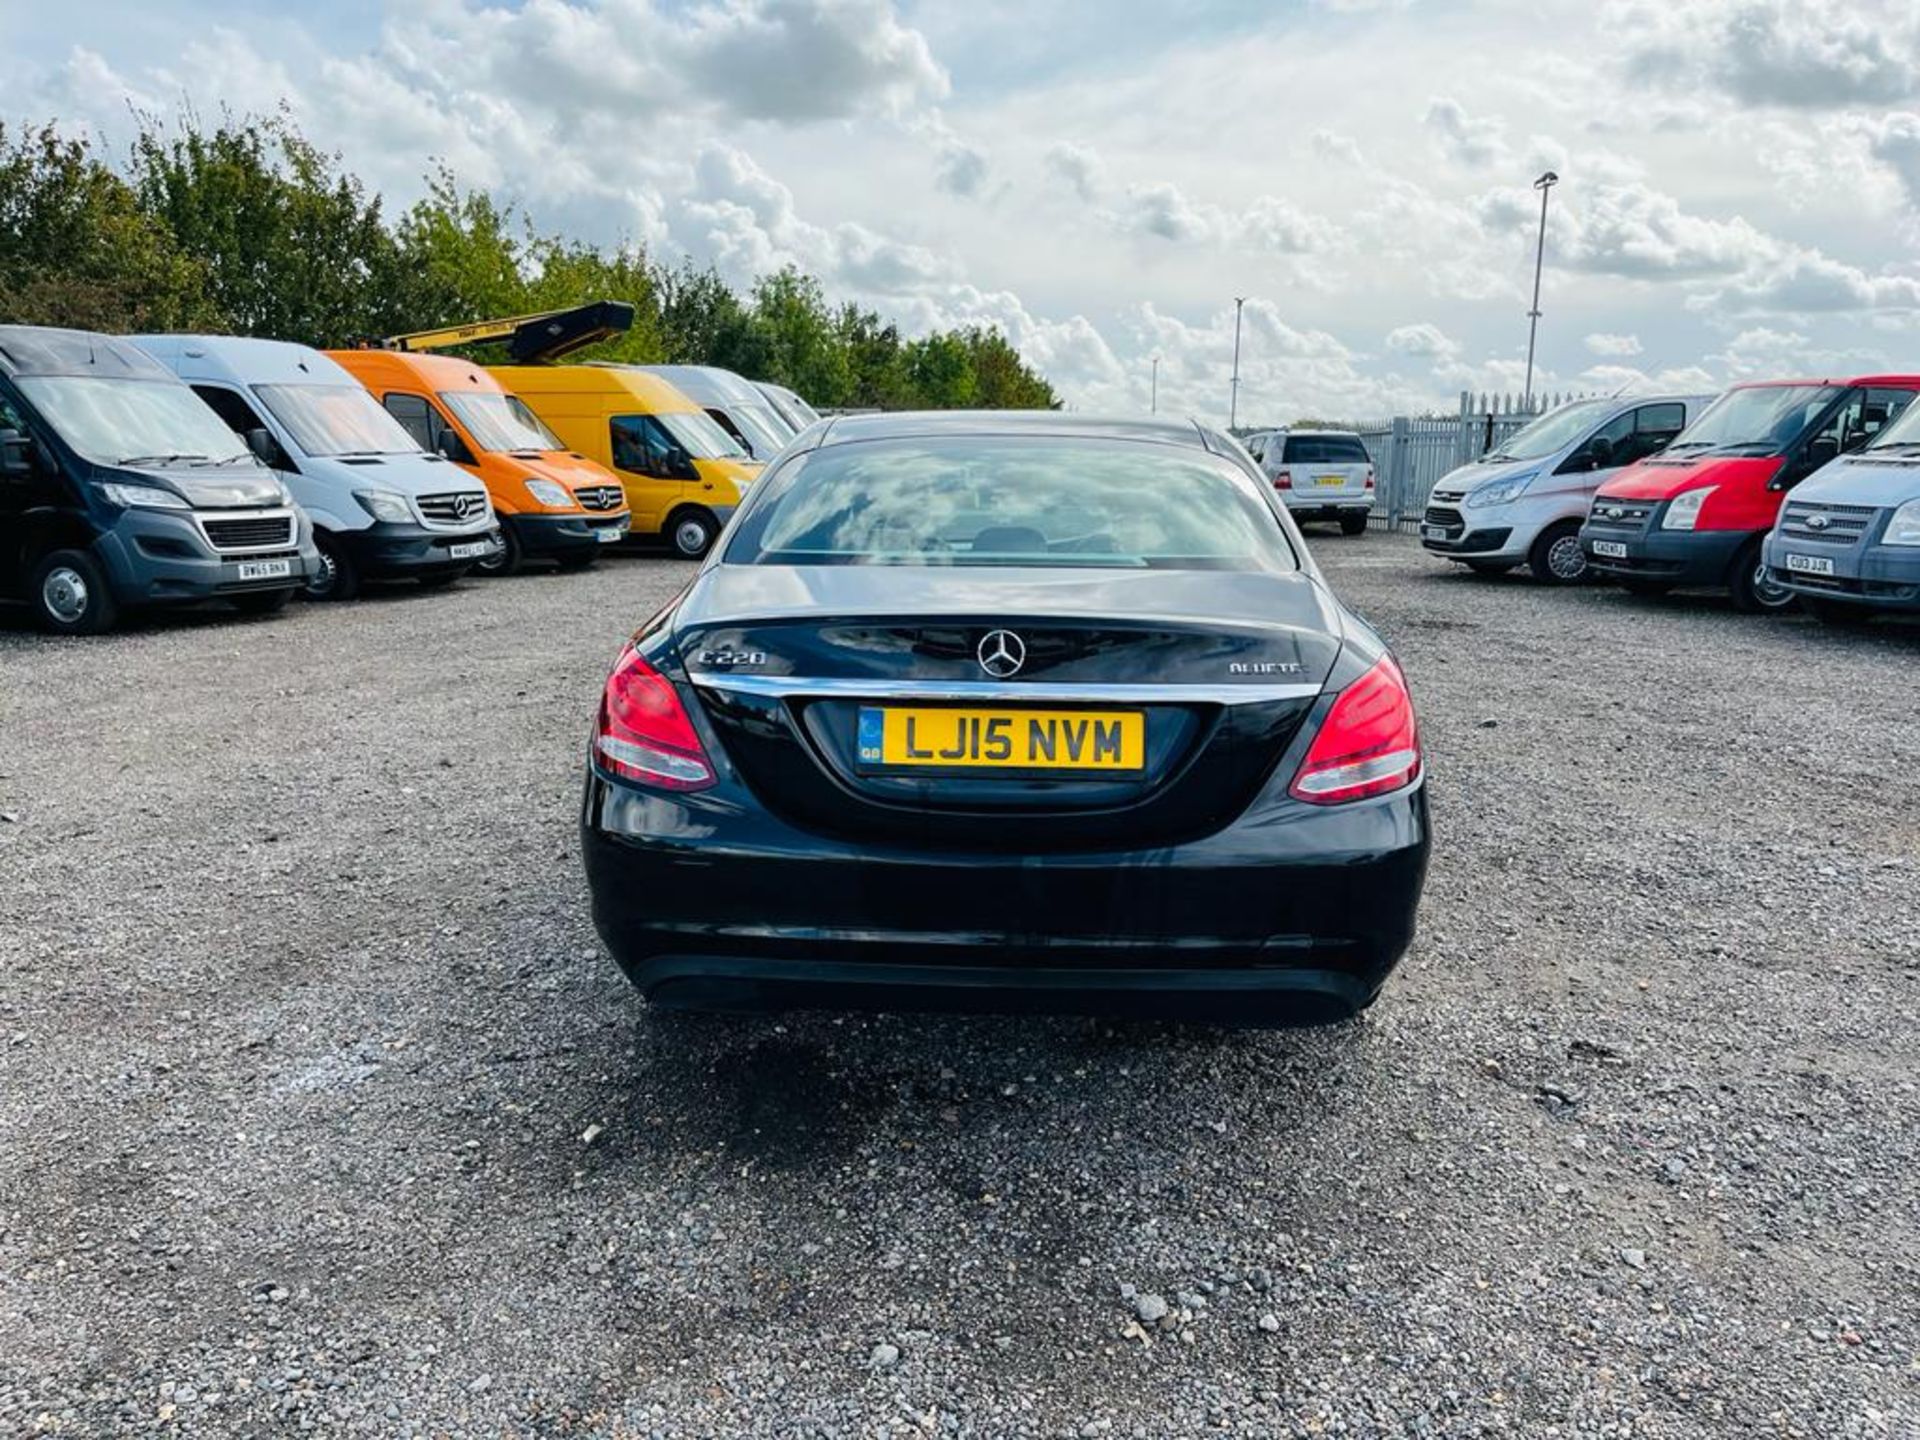 ** ON SALE ** Mercedes - Benz C220 SE Saloon 2.1 2015 "15 Reg" - Automatic - A/C - Only 72548 Miles - Image 6 of 29